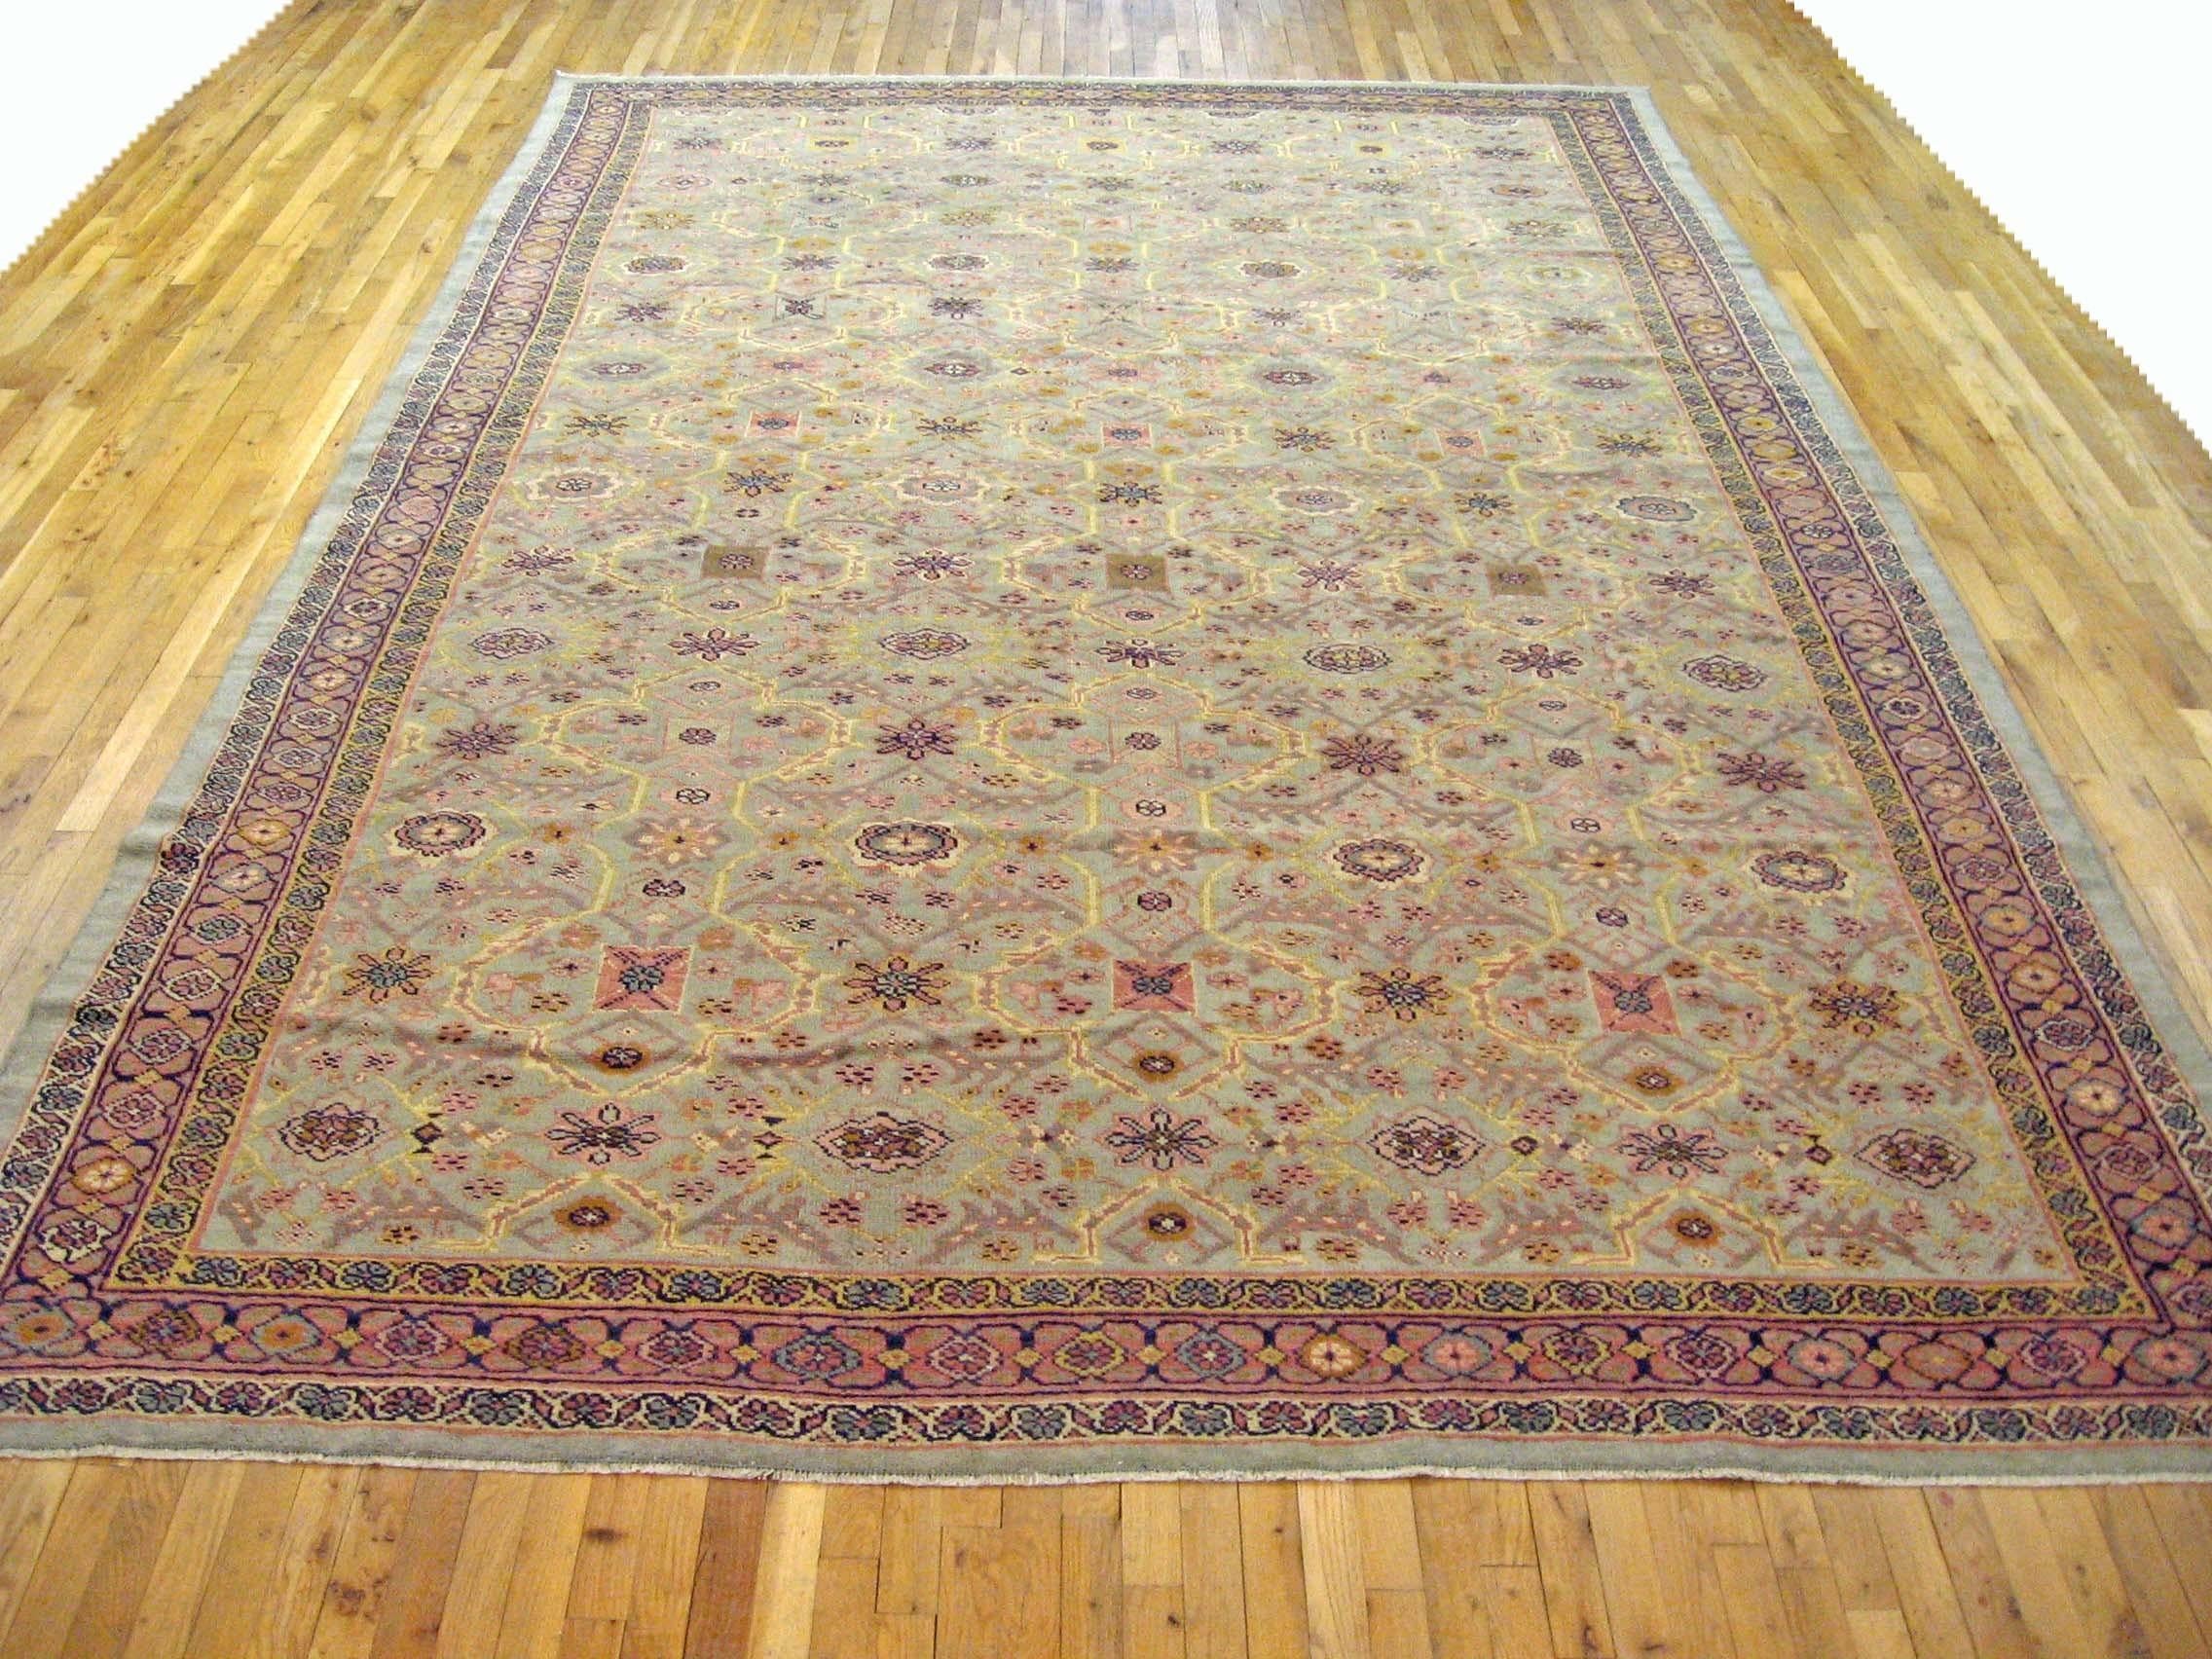 Antique Persian Sultanabad Rug, Roomlery size, circa 1910

A one-of-a-kind antique Persian Sultanabad oriental carpet with a thick and lustrous wool pile, knotted by hand, with soft touch and great resistance to wear. This carpet features a